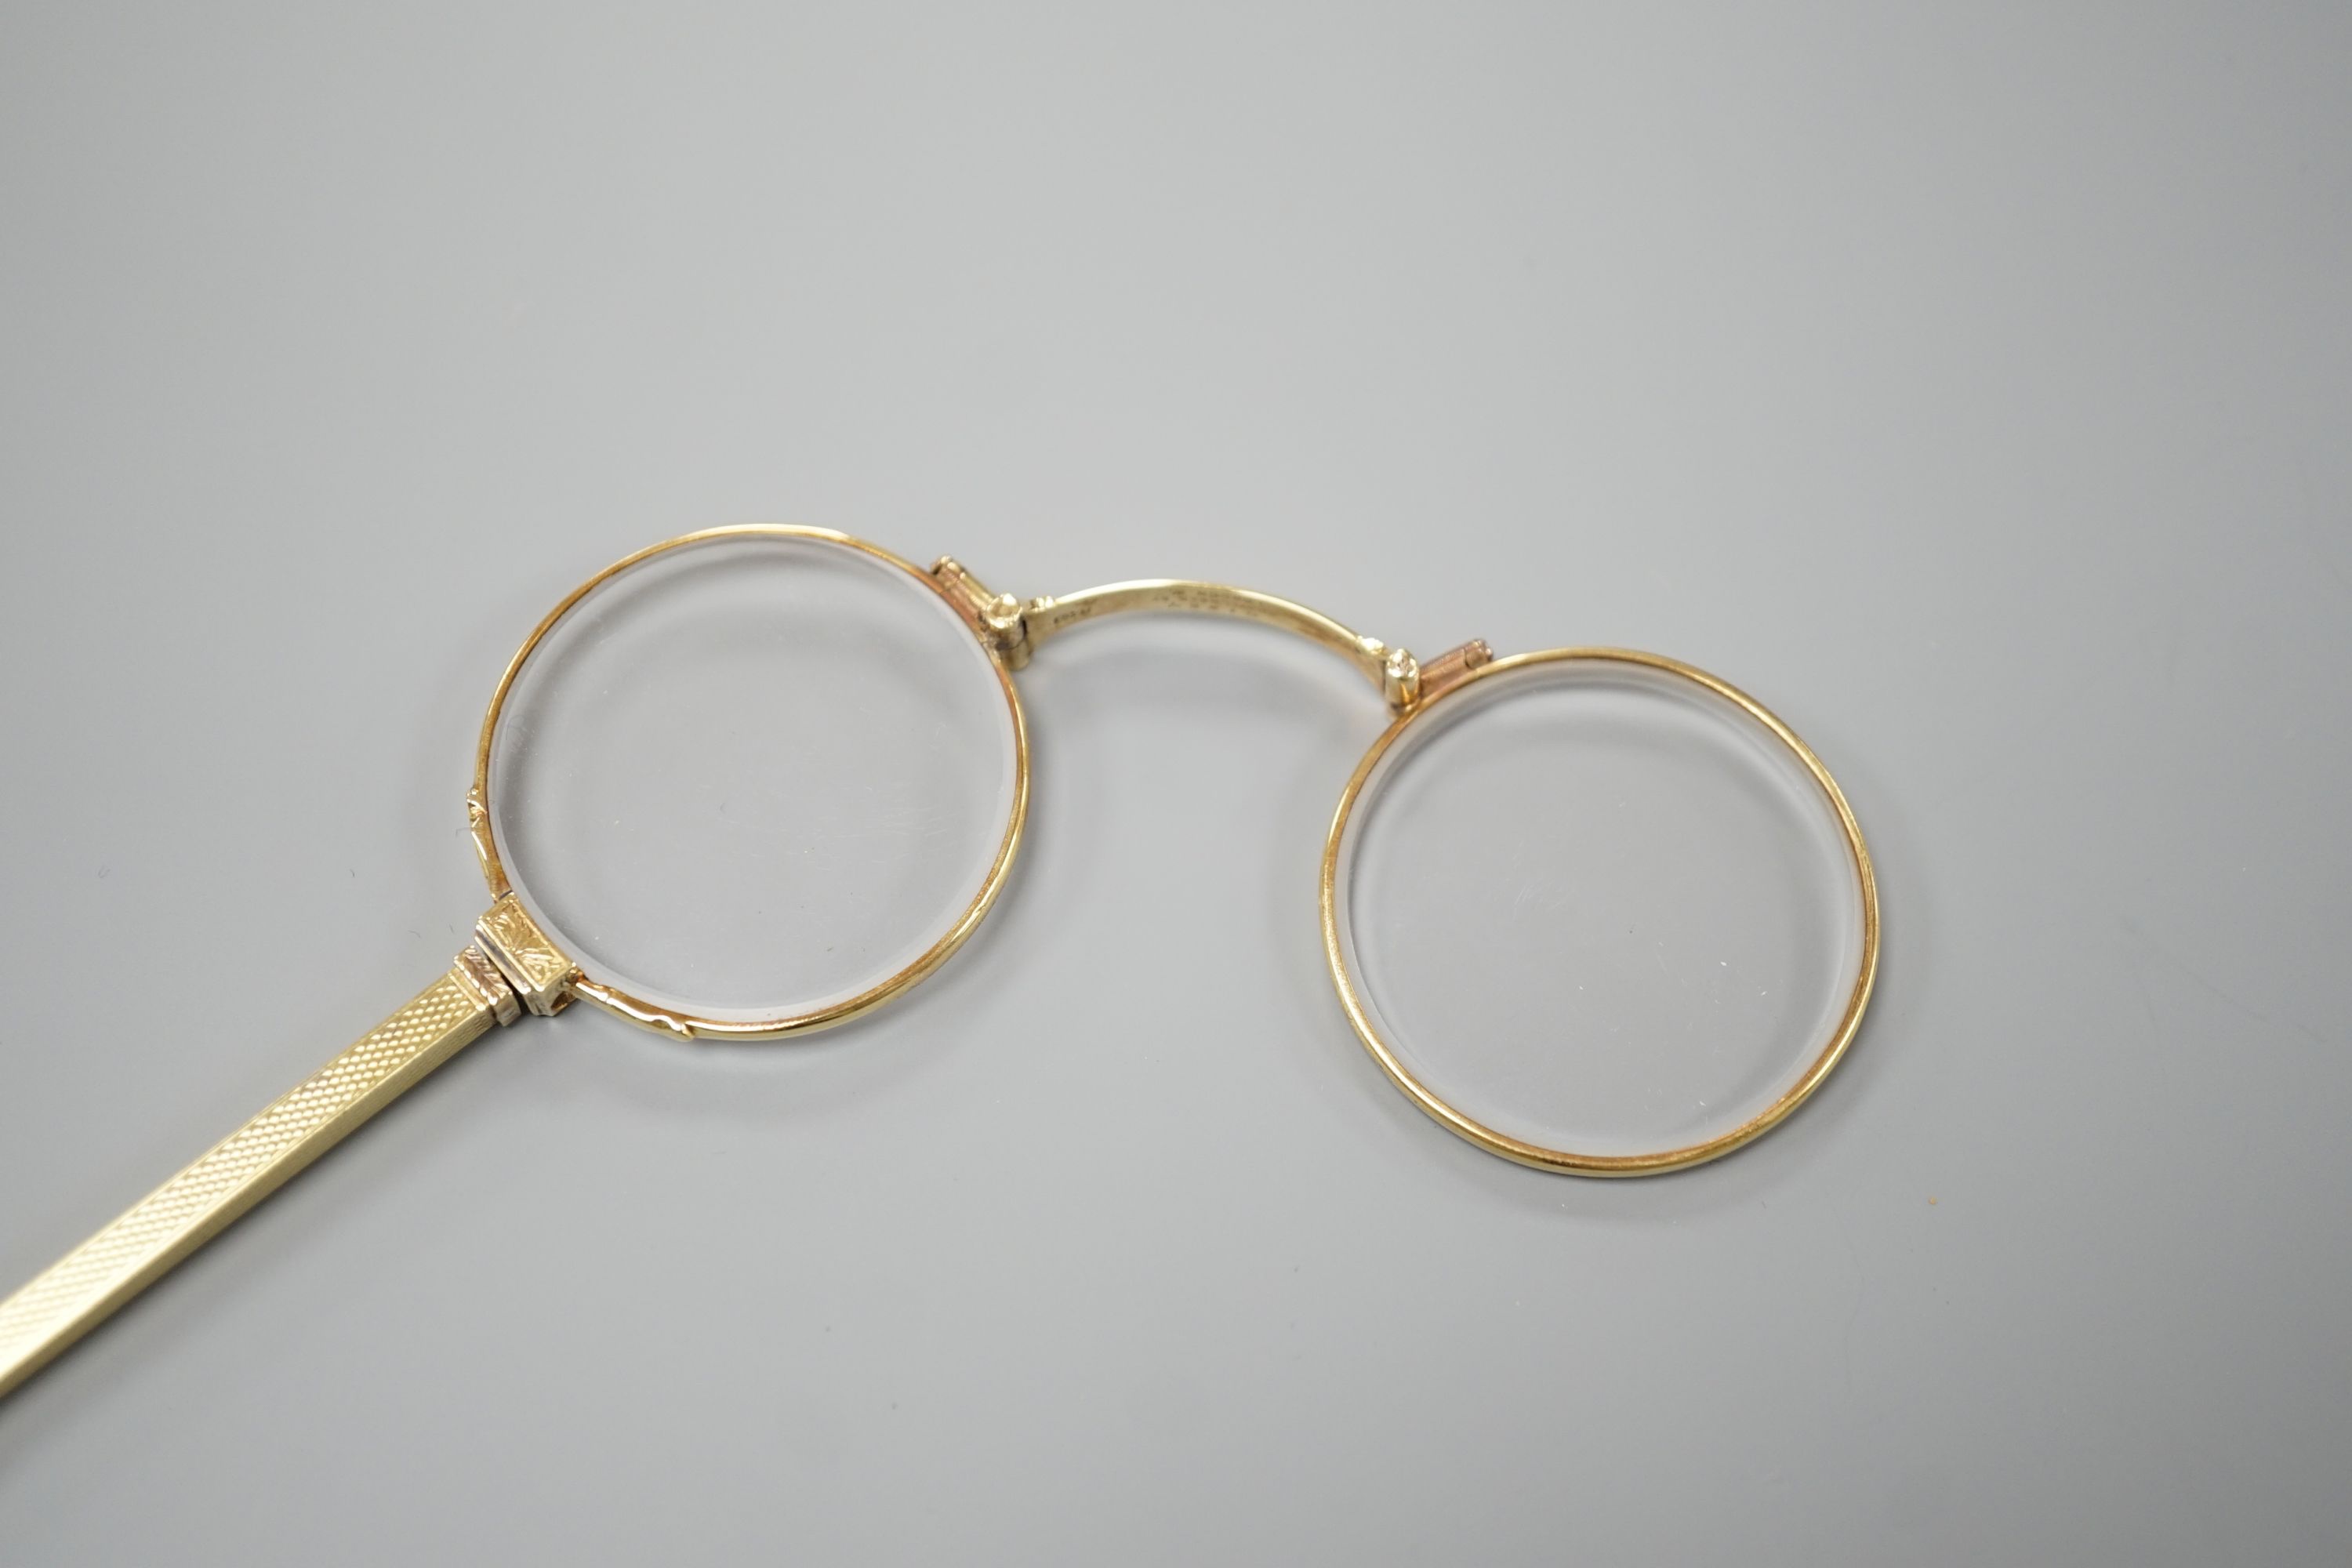 A pair of Edwardian 15ct lorgnettes, by Dixie, 20 Welbeck Street, London, with engine turned handle, - Image 2 of 4